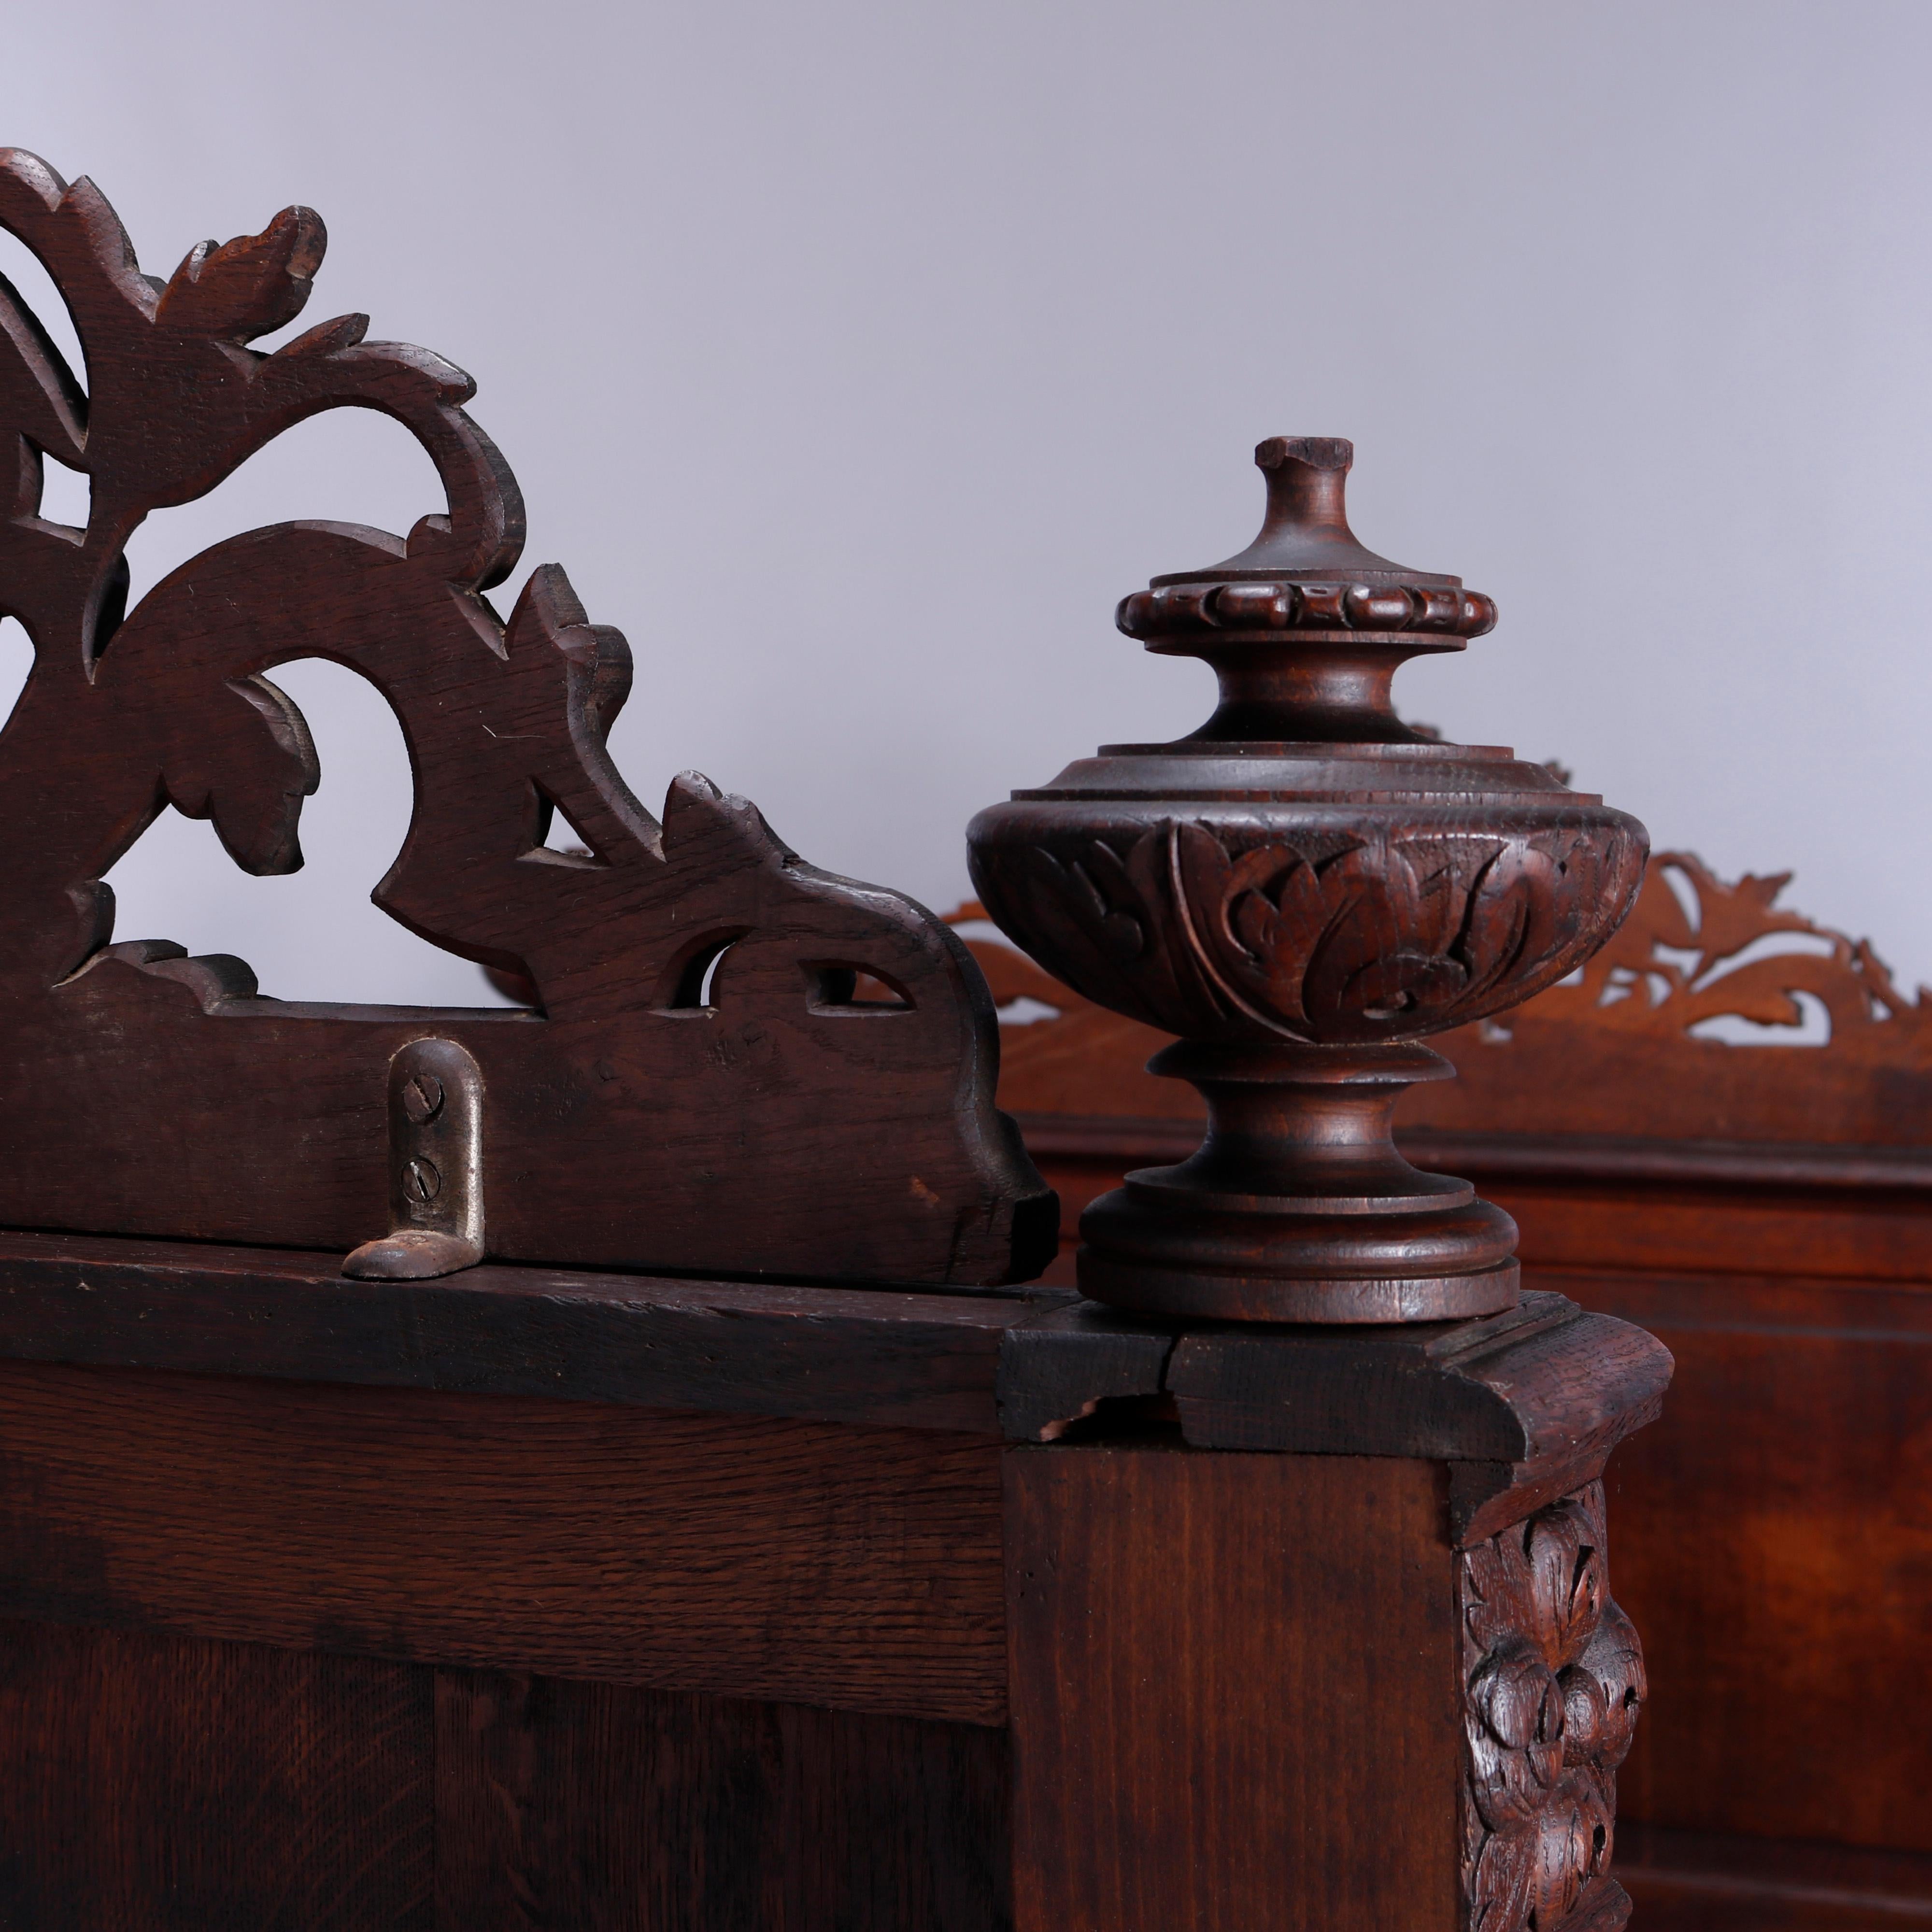 19th Century Antique Elizabethan Figural Carved Oak Double Bed Frame with Griffons, c1850